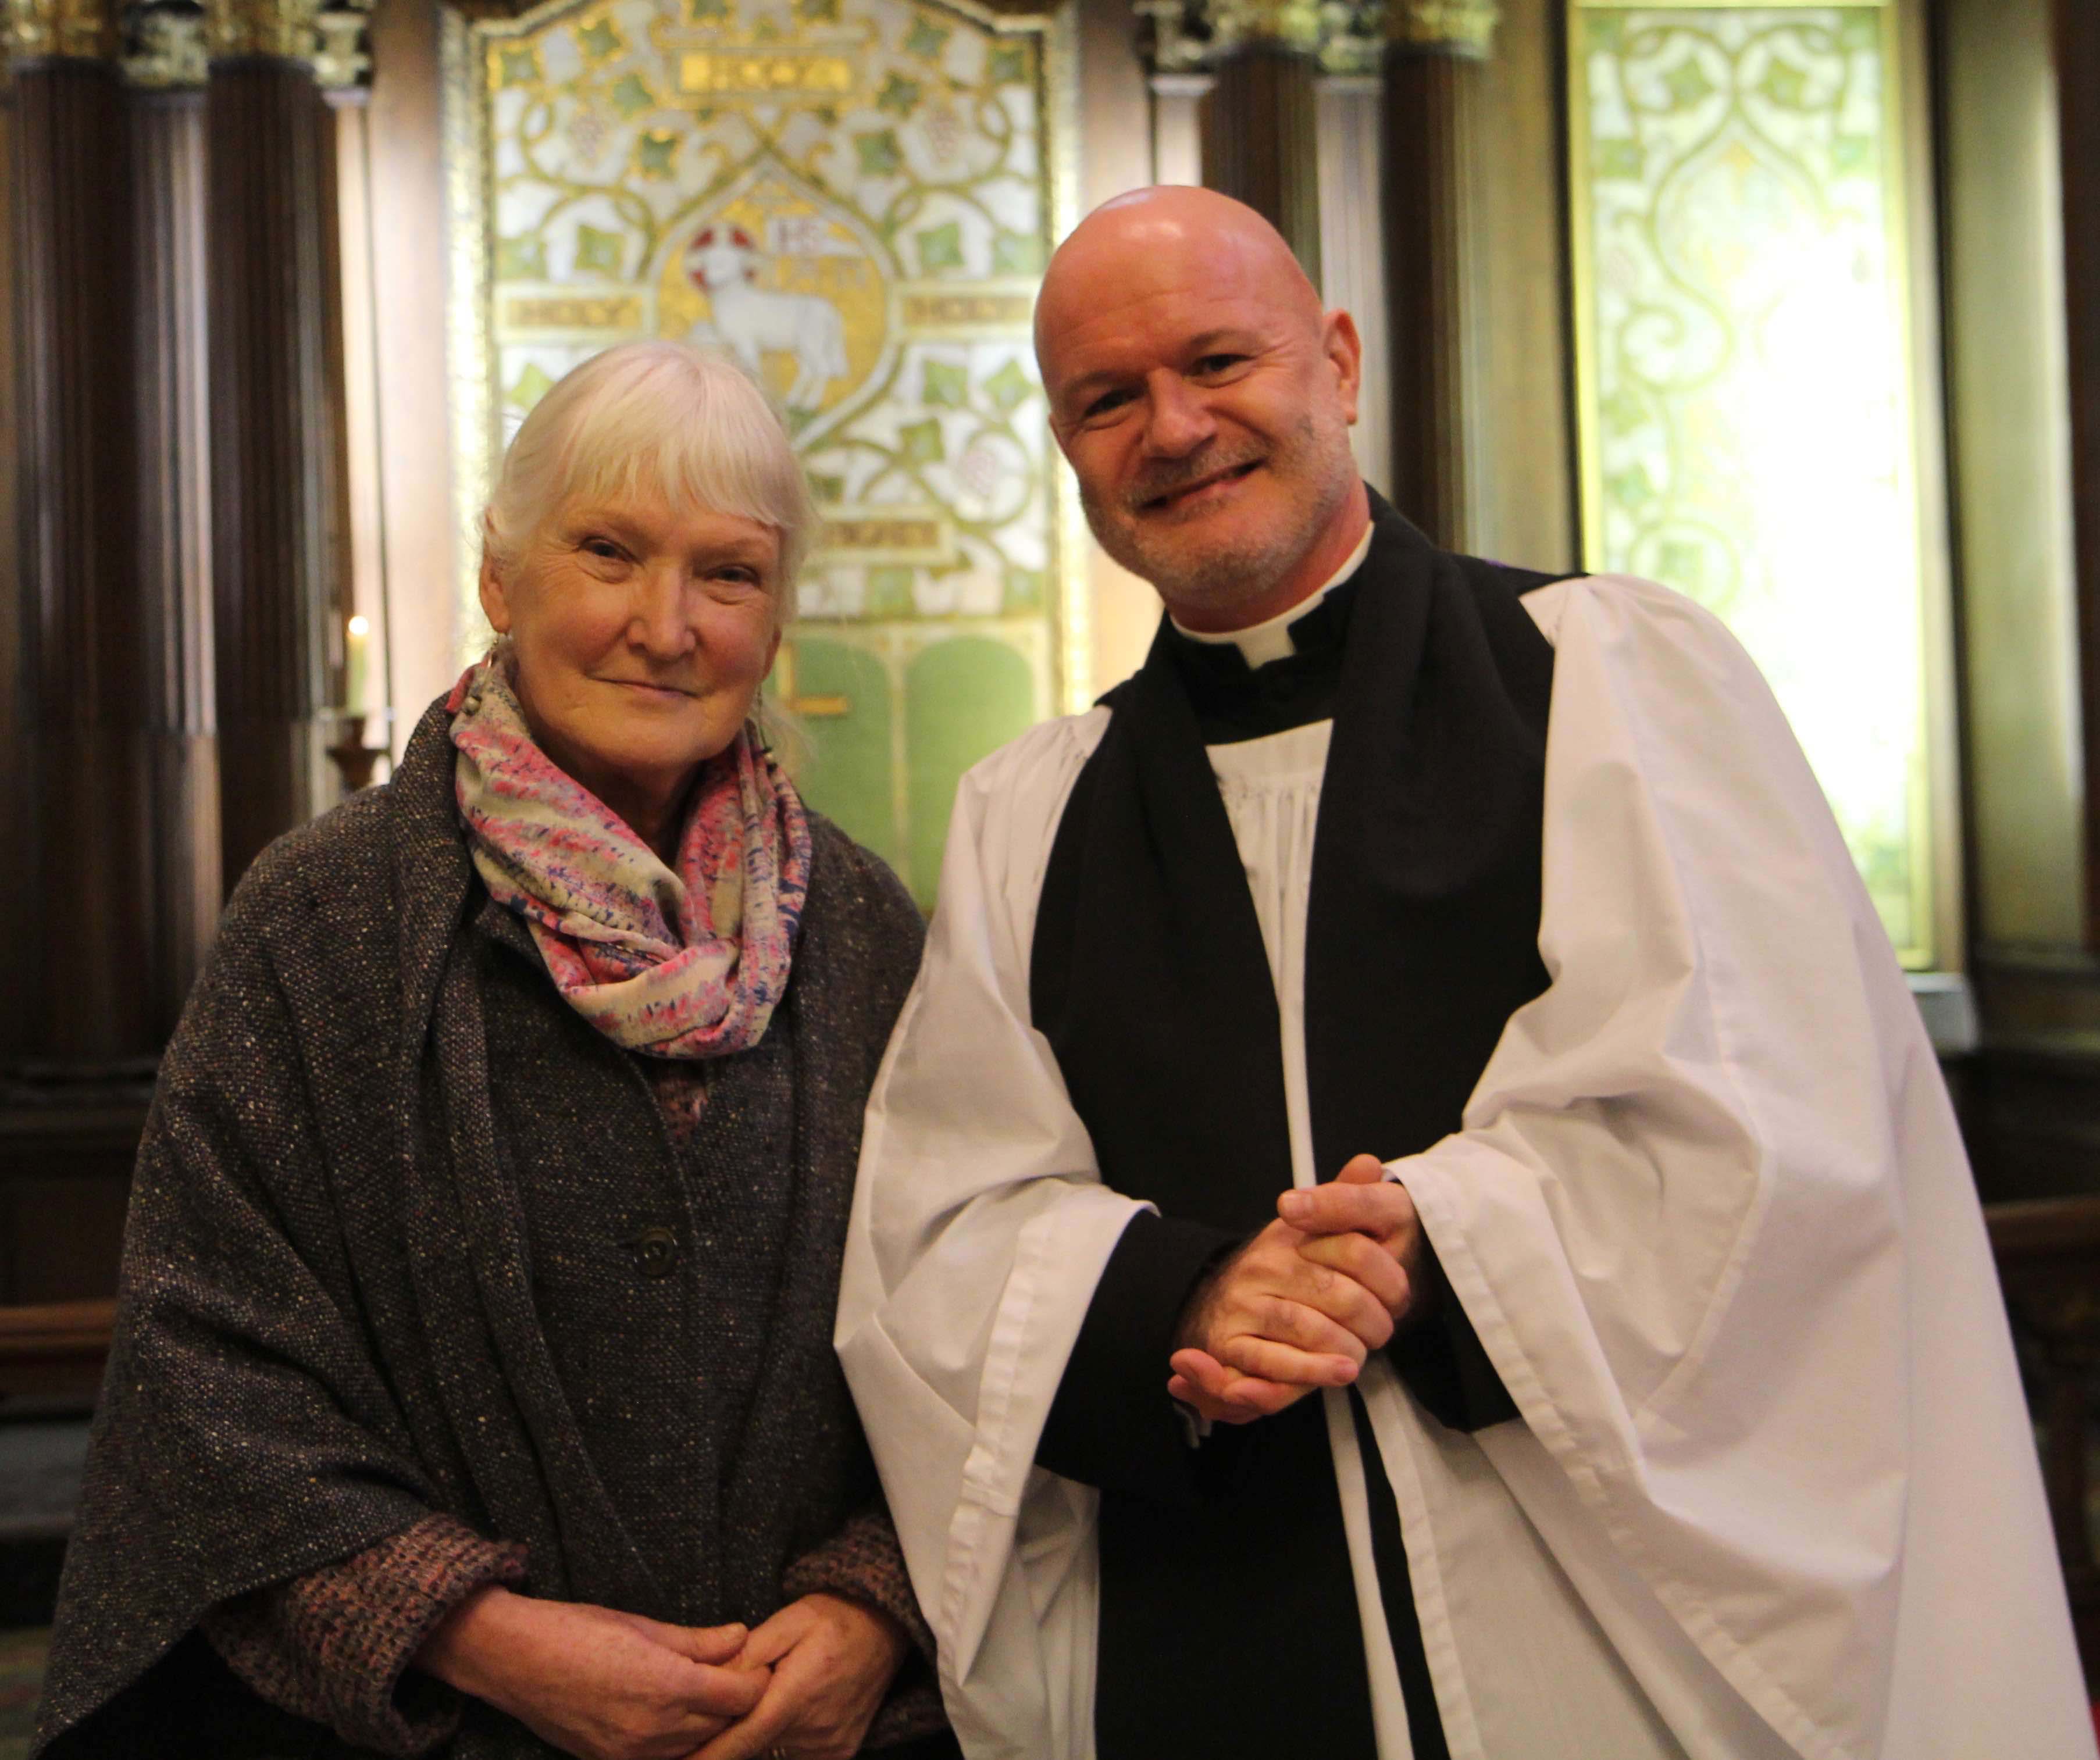 Alice Leahy, founder and director of Alice Leahy Trust, and Canon David Gillespie, Vicar of St Ann's Church, Dublin, following the Black Santa Service.